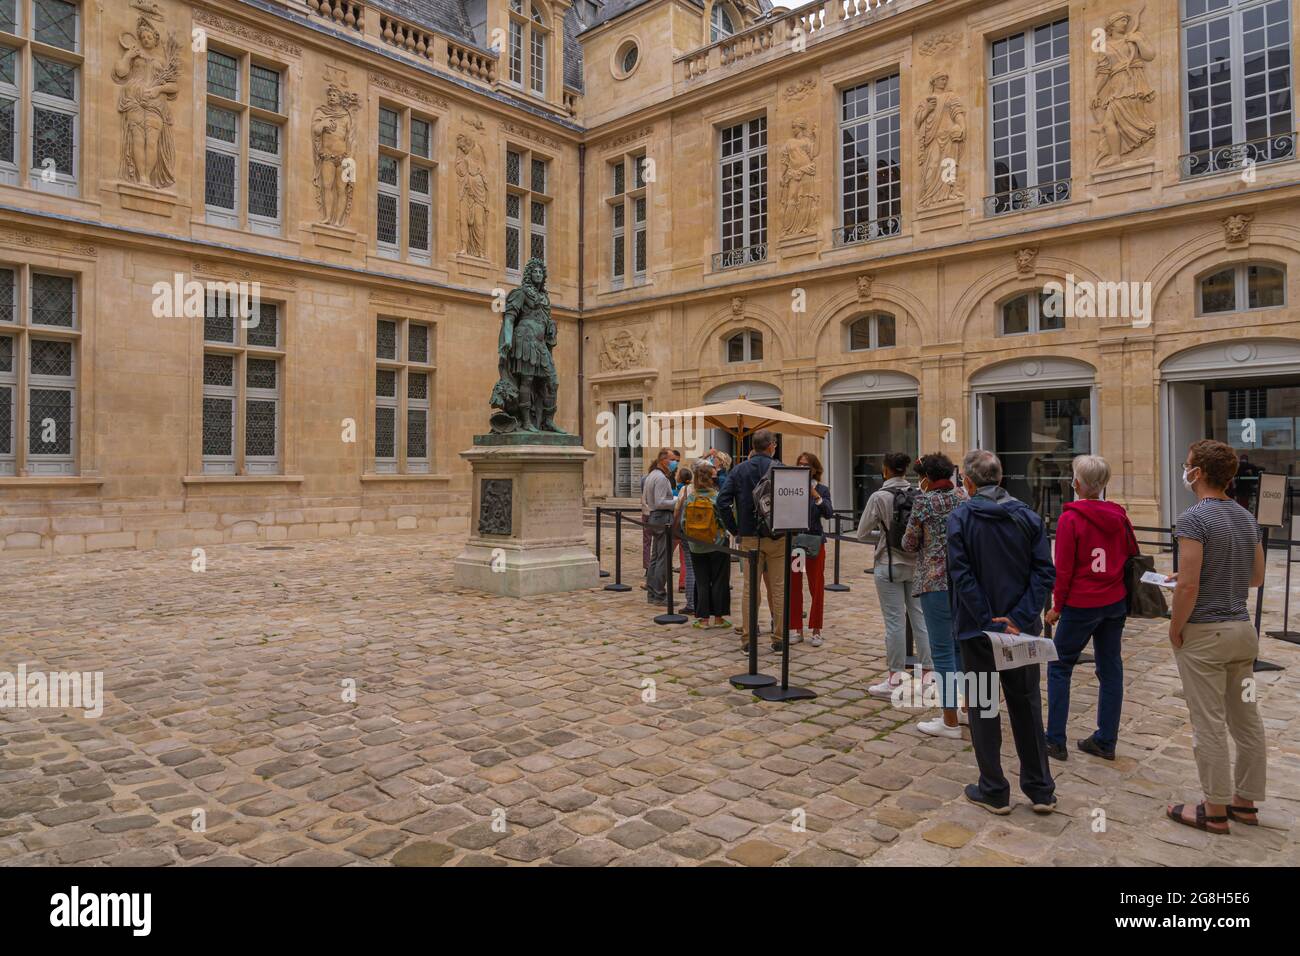 Paris, France - 07 16 2021: View of the statue of Louis XIV inside the courtyard of Carnavalet Museum Stock Photo